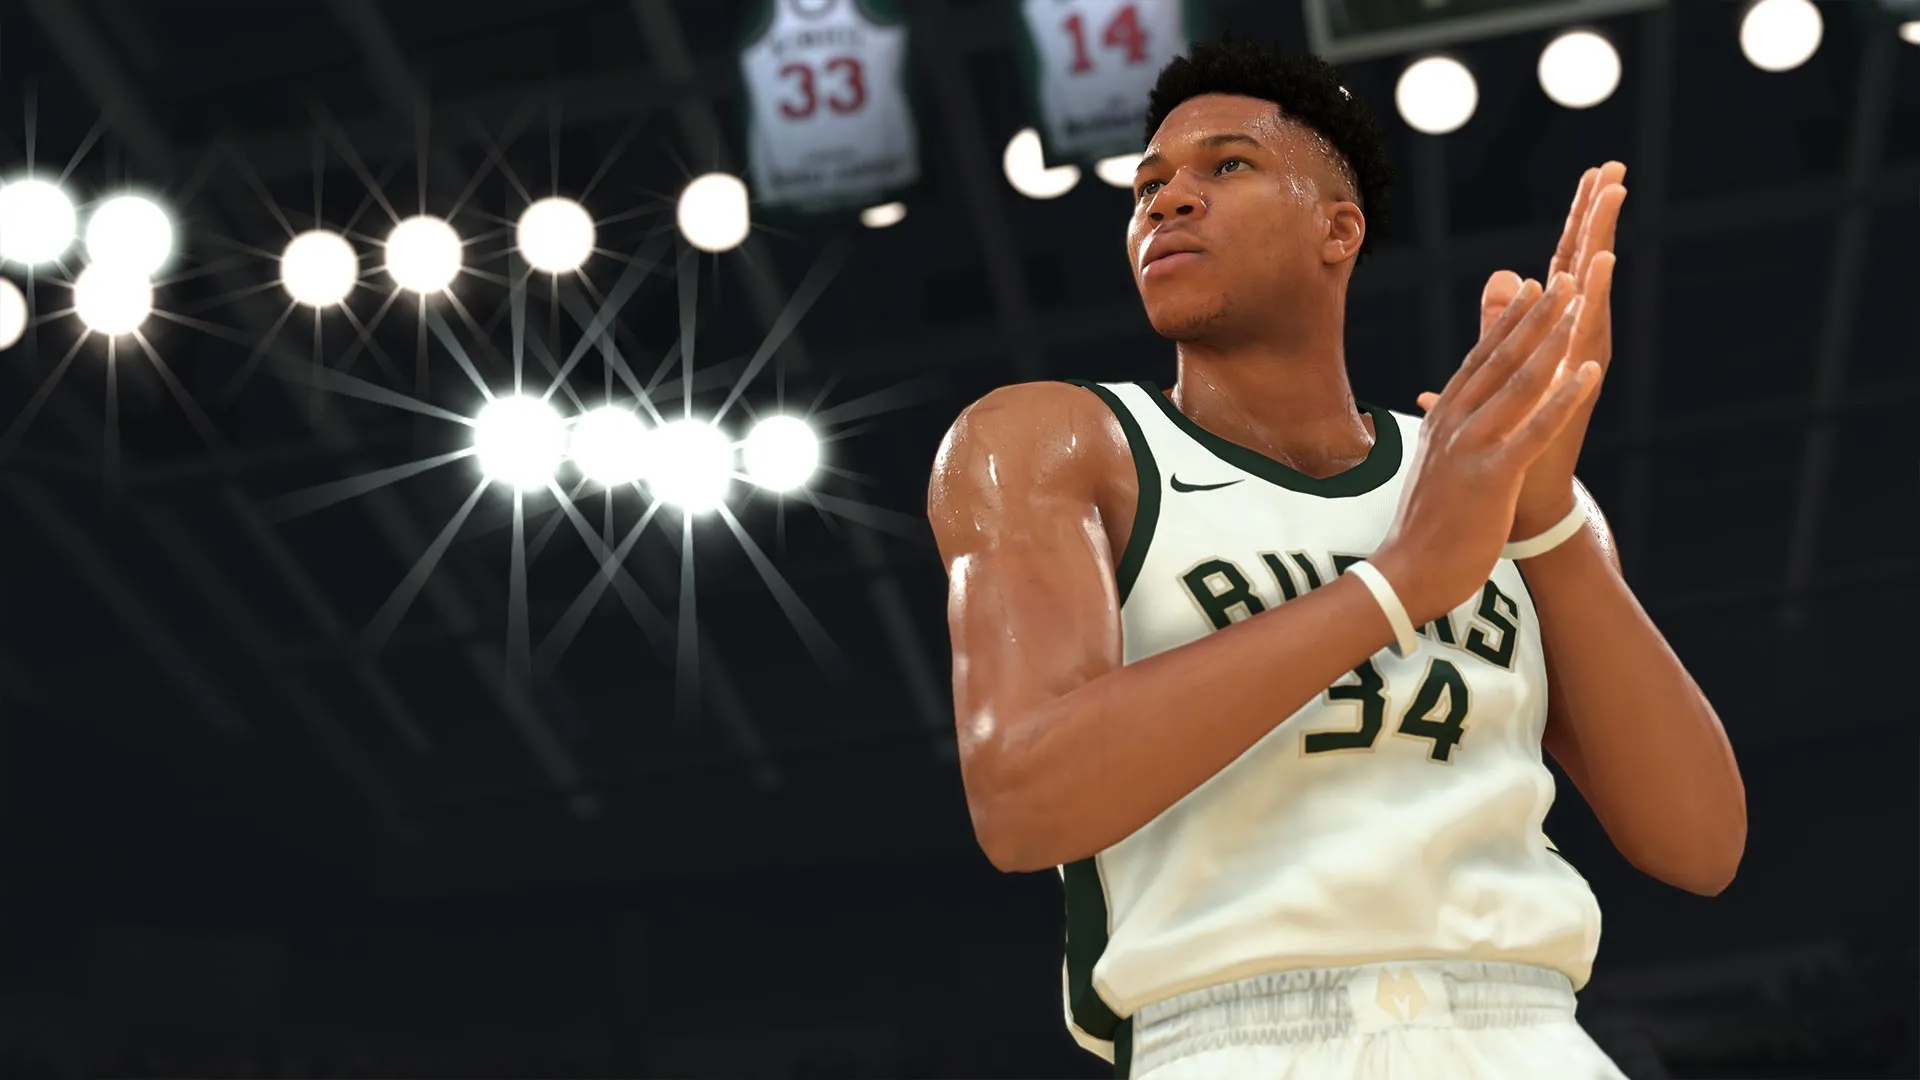 2K Sports confirms NBA 2K16 is a Spike Lee joint (update) - Polygon